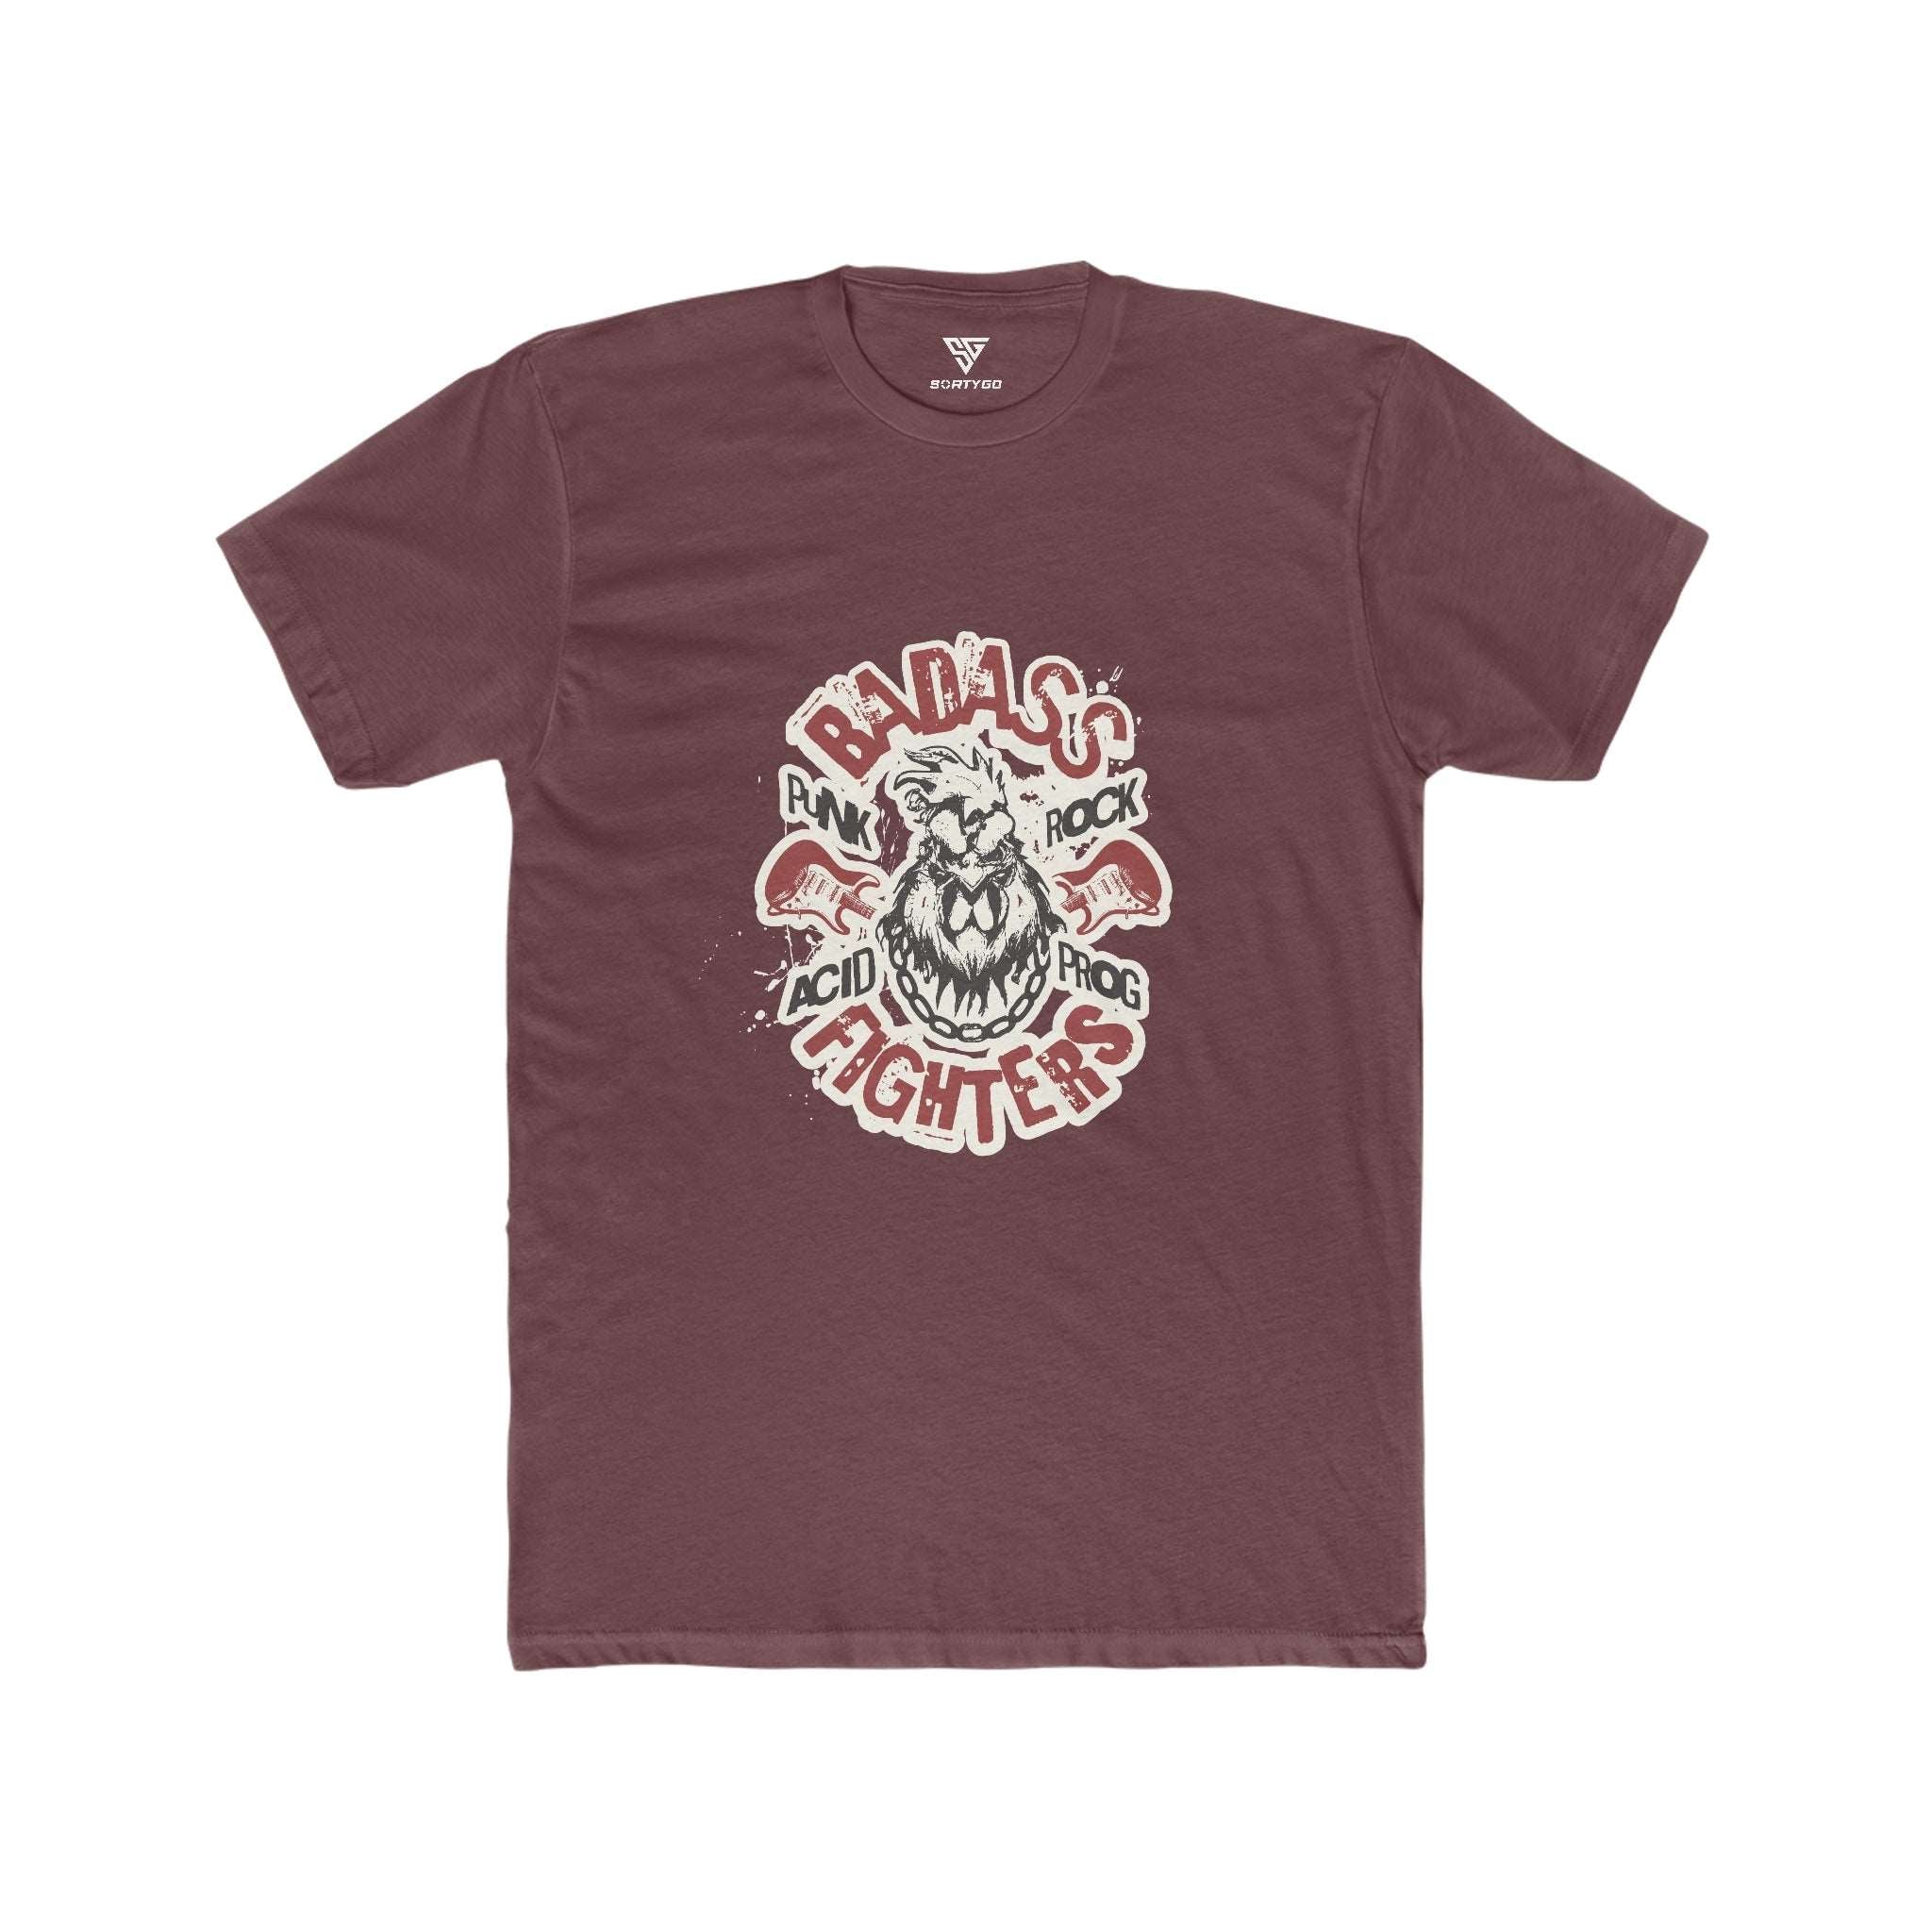 SORTYGO - Badass Fighters Men Fitted T-Shirt in Solid Maroon